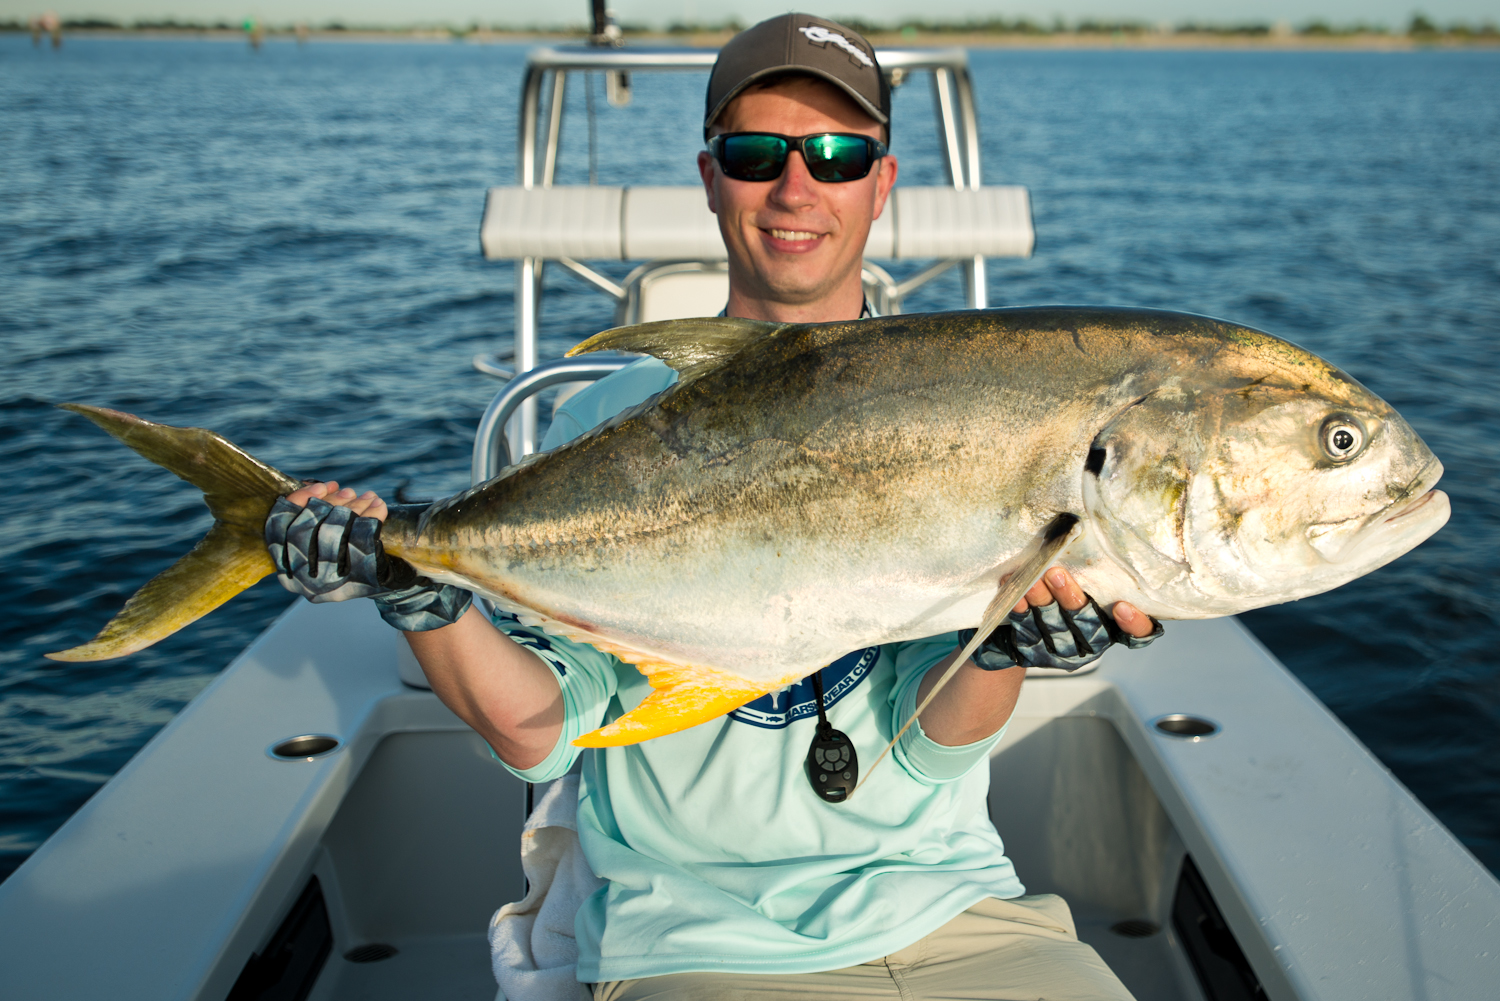 Southern-Fly-Expeditions-StephenNicoll-JackCrevalle-04Sep2015-1.jpg